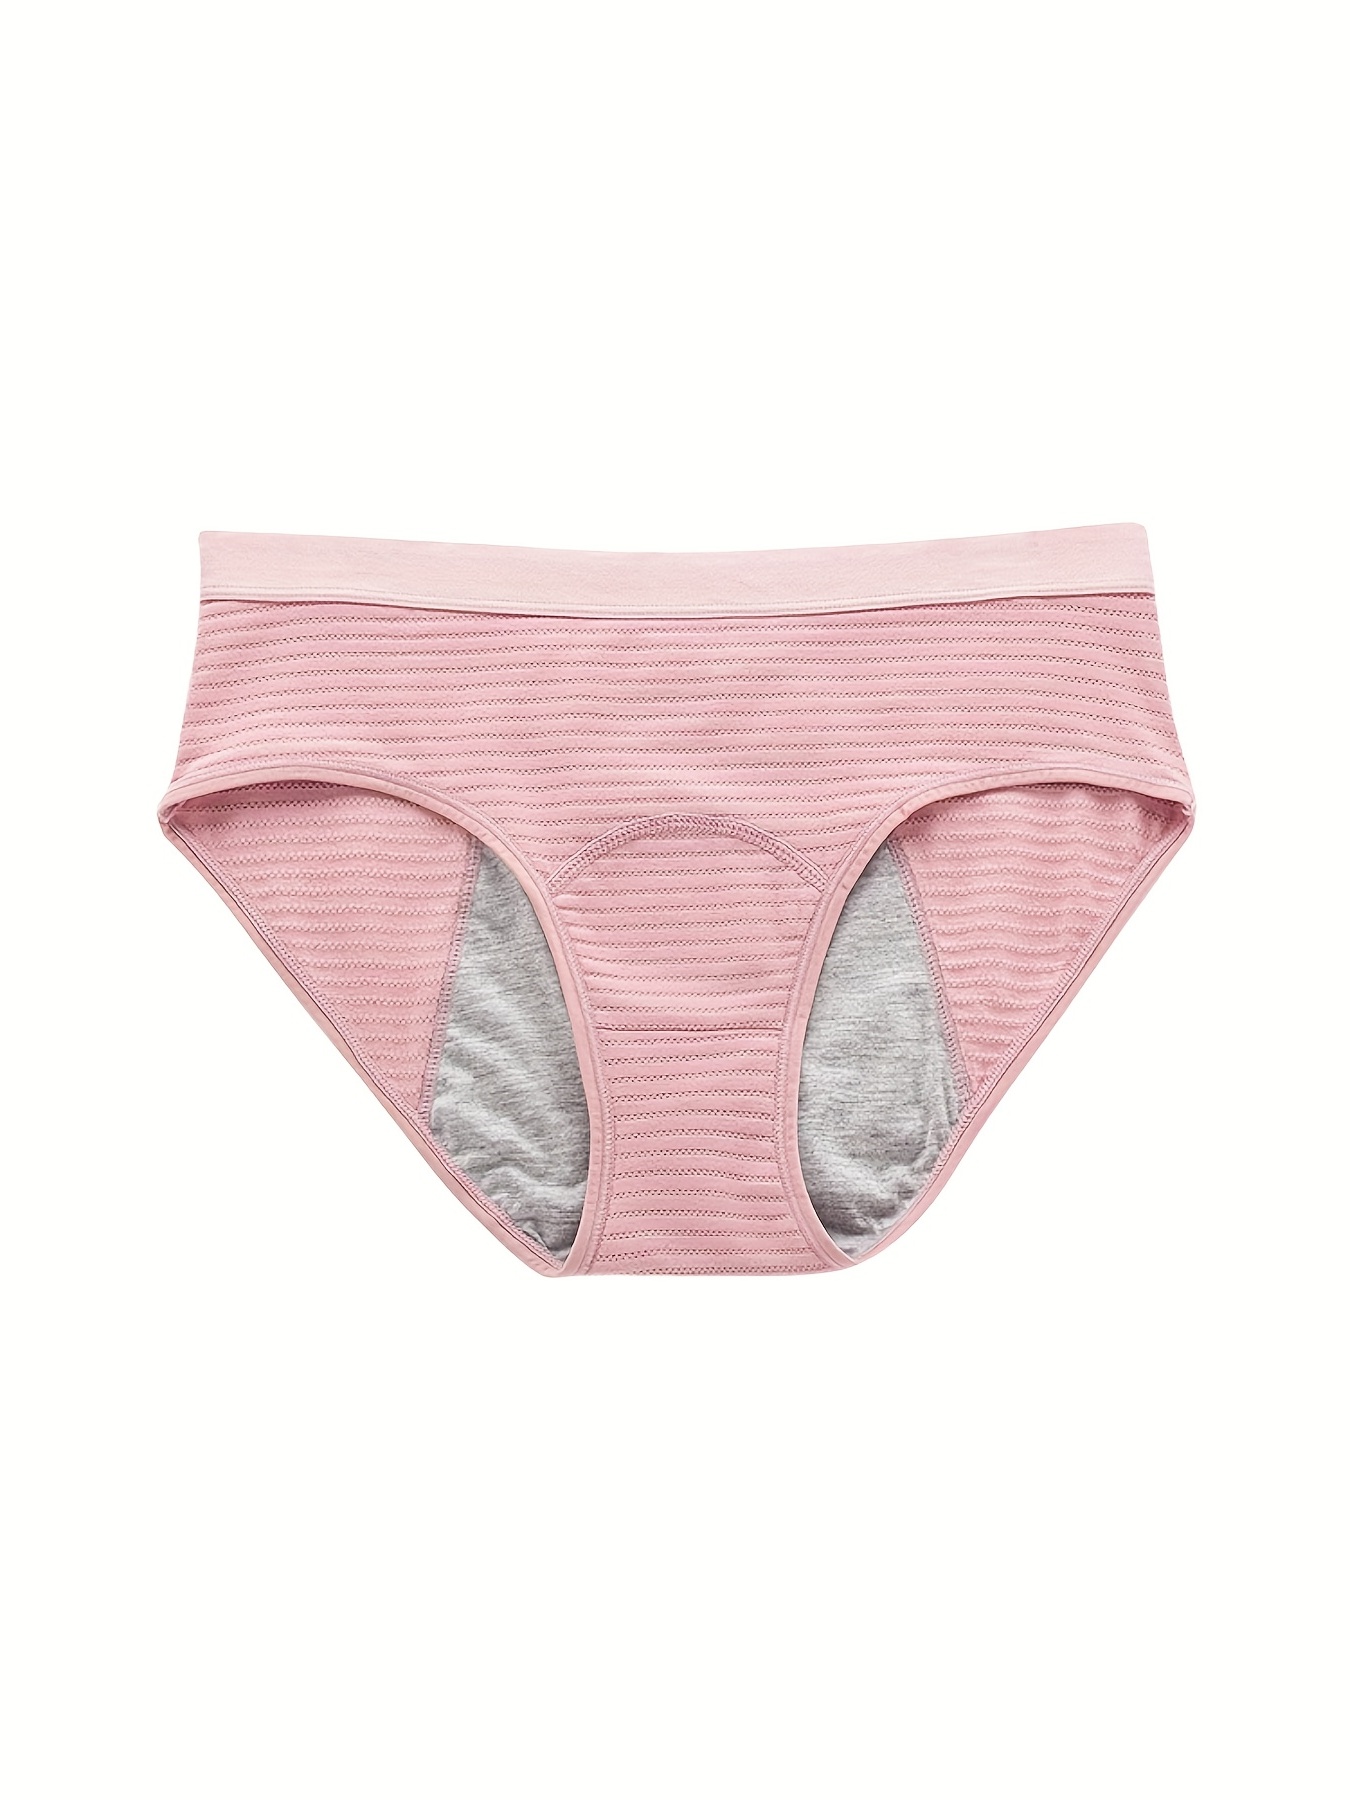 3pcs/Set Low Absorbency High Waist Women'S Period Panties With Comfortable  Fit For Daily Wear